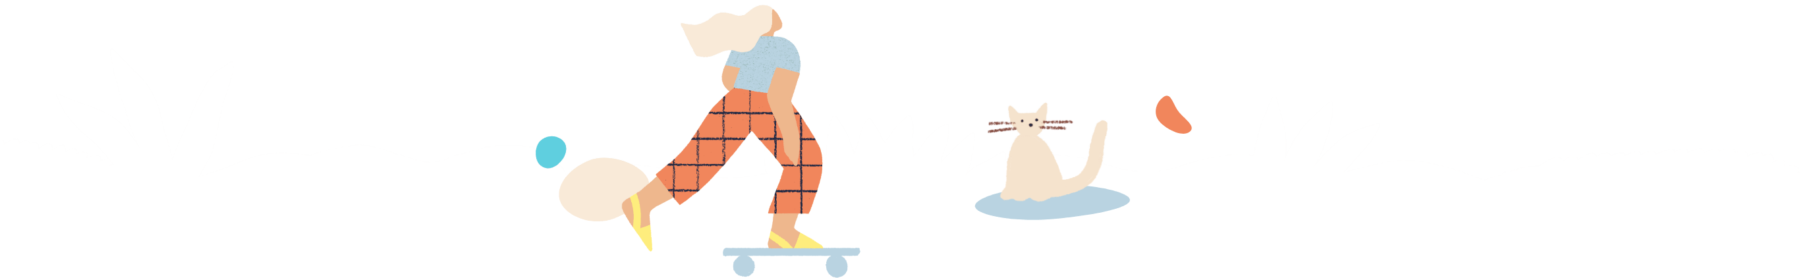 Illustrations of a woman riding a skateboard and of a white cat